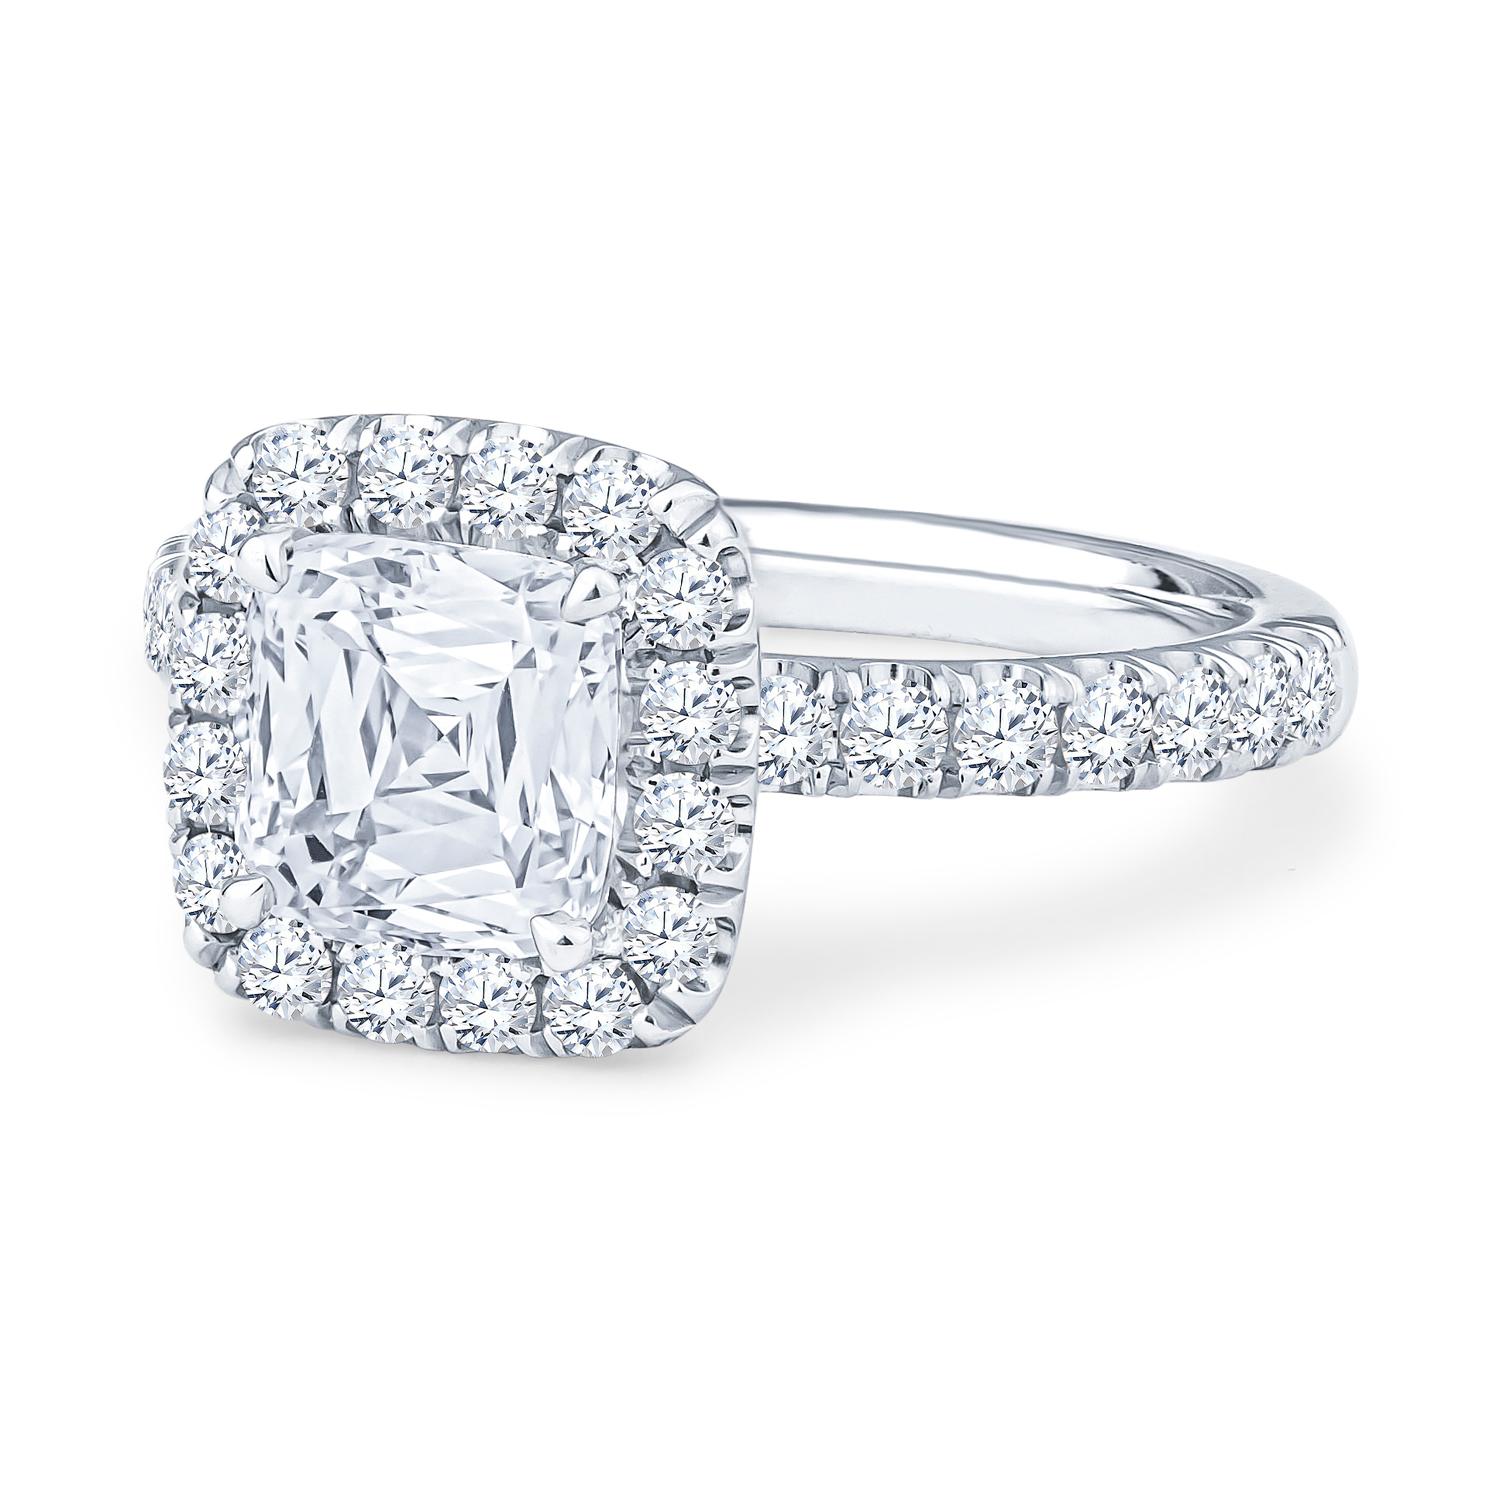 This 1.60ct natural Crisscut cushion diamond, J VS1, GIA #16315010 (inscribed CRISSCUT CU 1949) is set in an 18kt white gold cushion halo engagement ring. There are 30 round brilliant cut diamonds going halfway across the band that have a 0.45ct